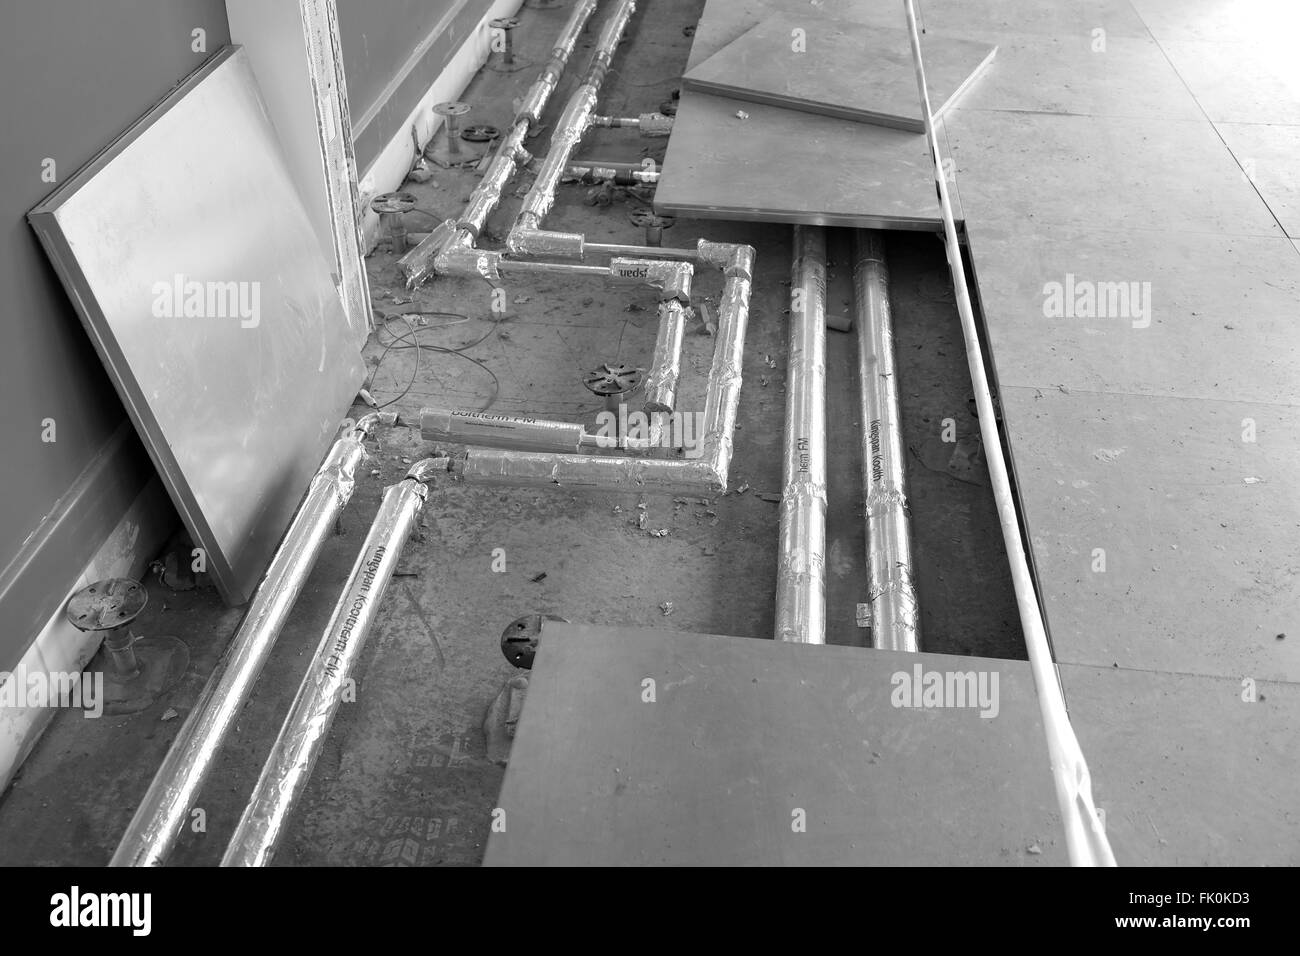 Heating pipework complete with environmentally friendly lagging fitted under the floor on a construction site. 4th March 2016 Stock Photo